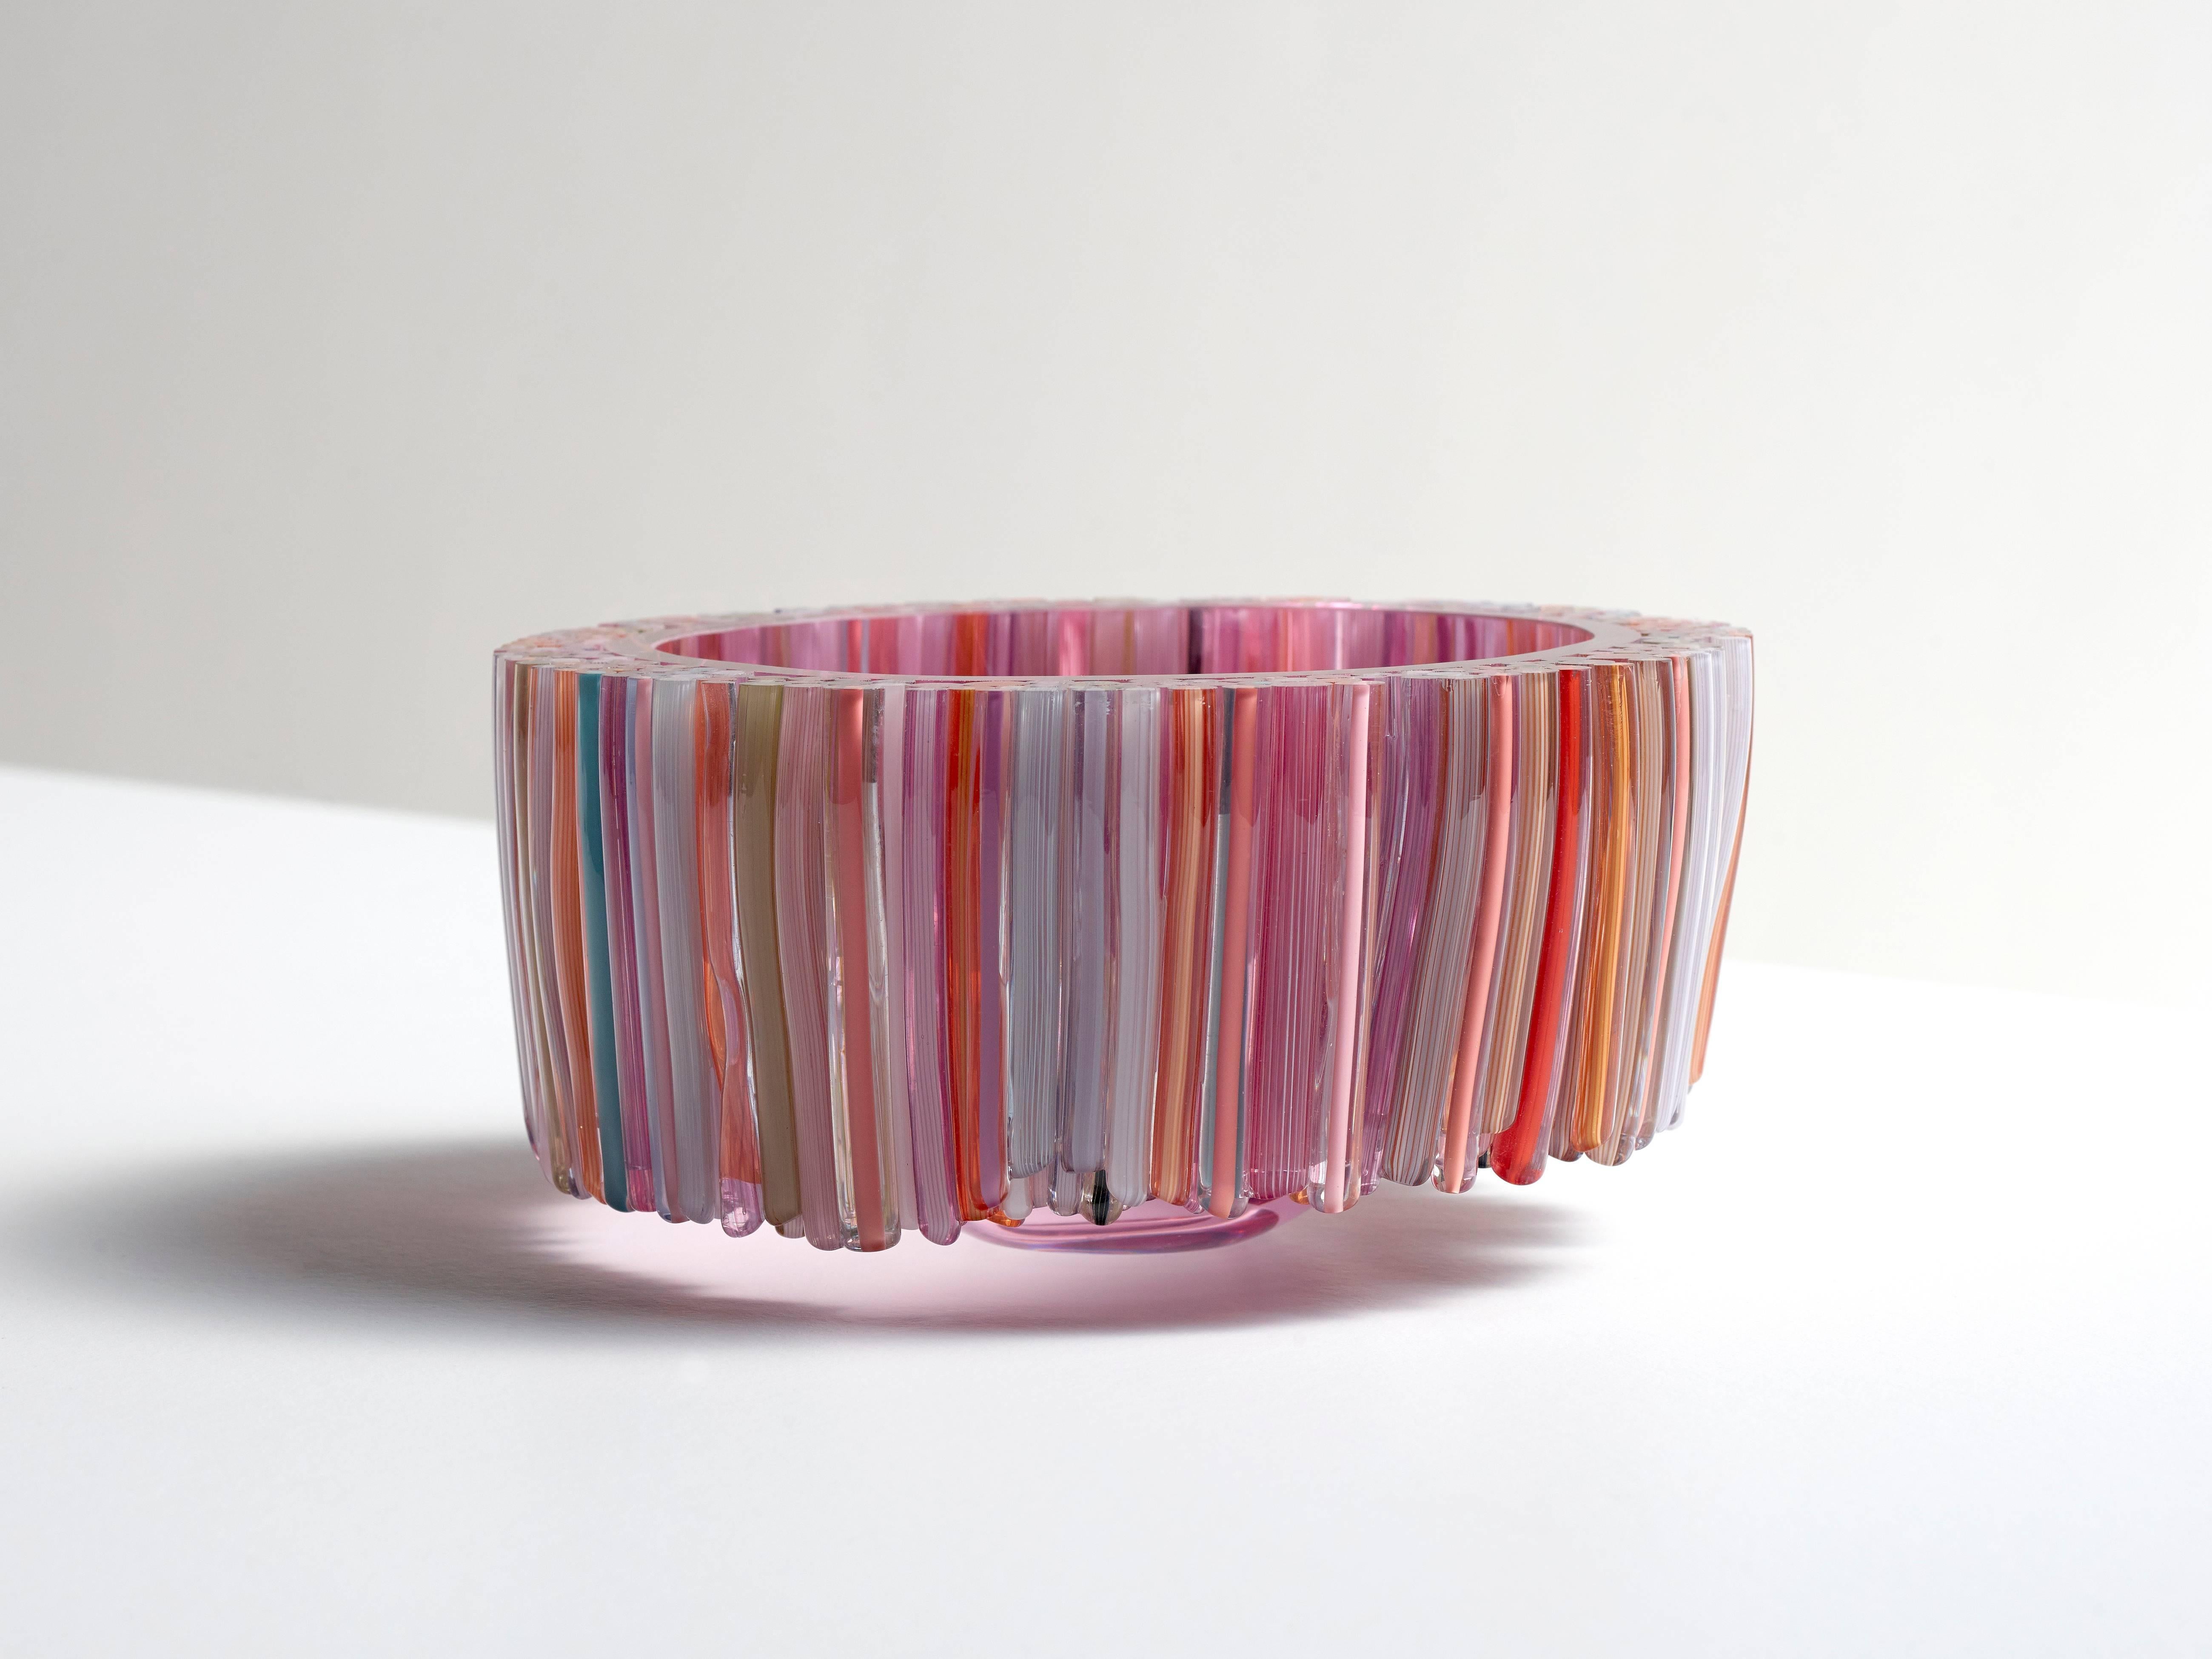 This beautiful blown glass red bowl is decorated with handcrafted glass threads that are melted to the body of the glass vessel. The many colors of the threads like, green, pink, blue, orange and white are stylishly combined, resulting in a playful